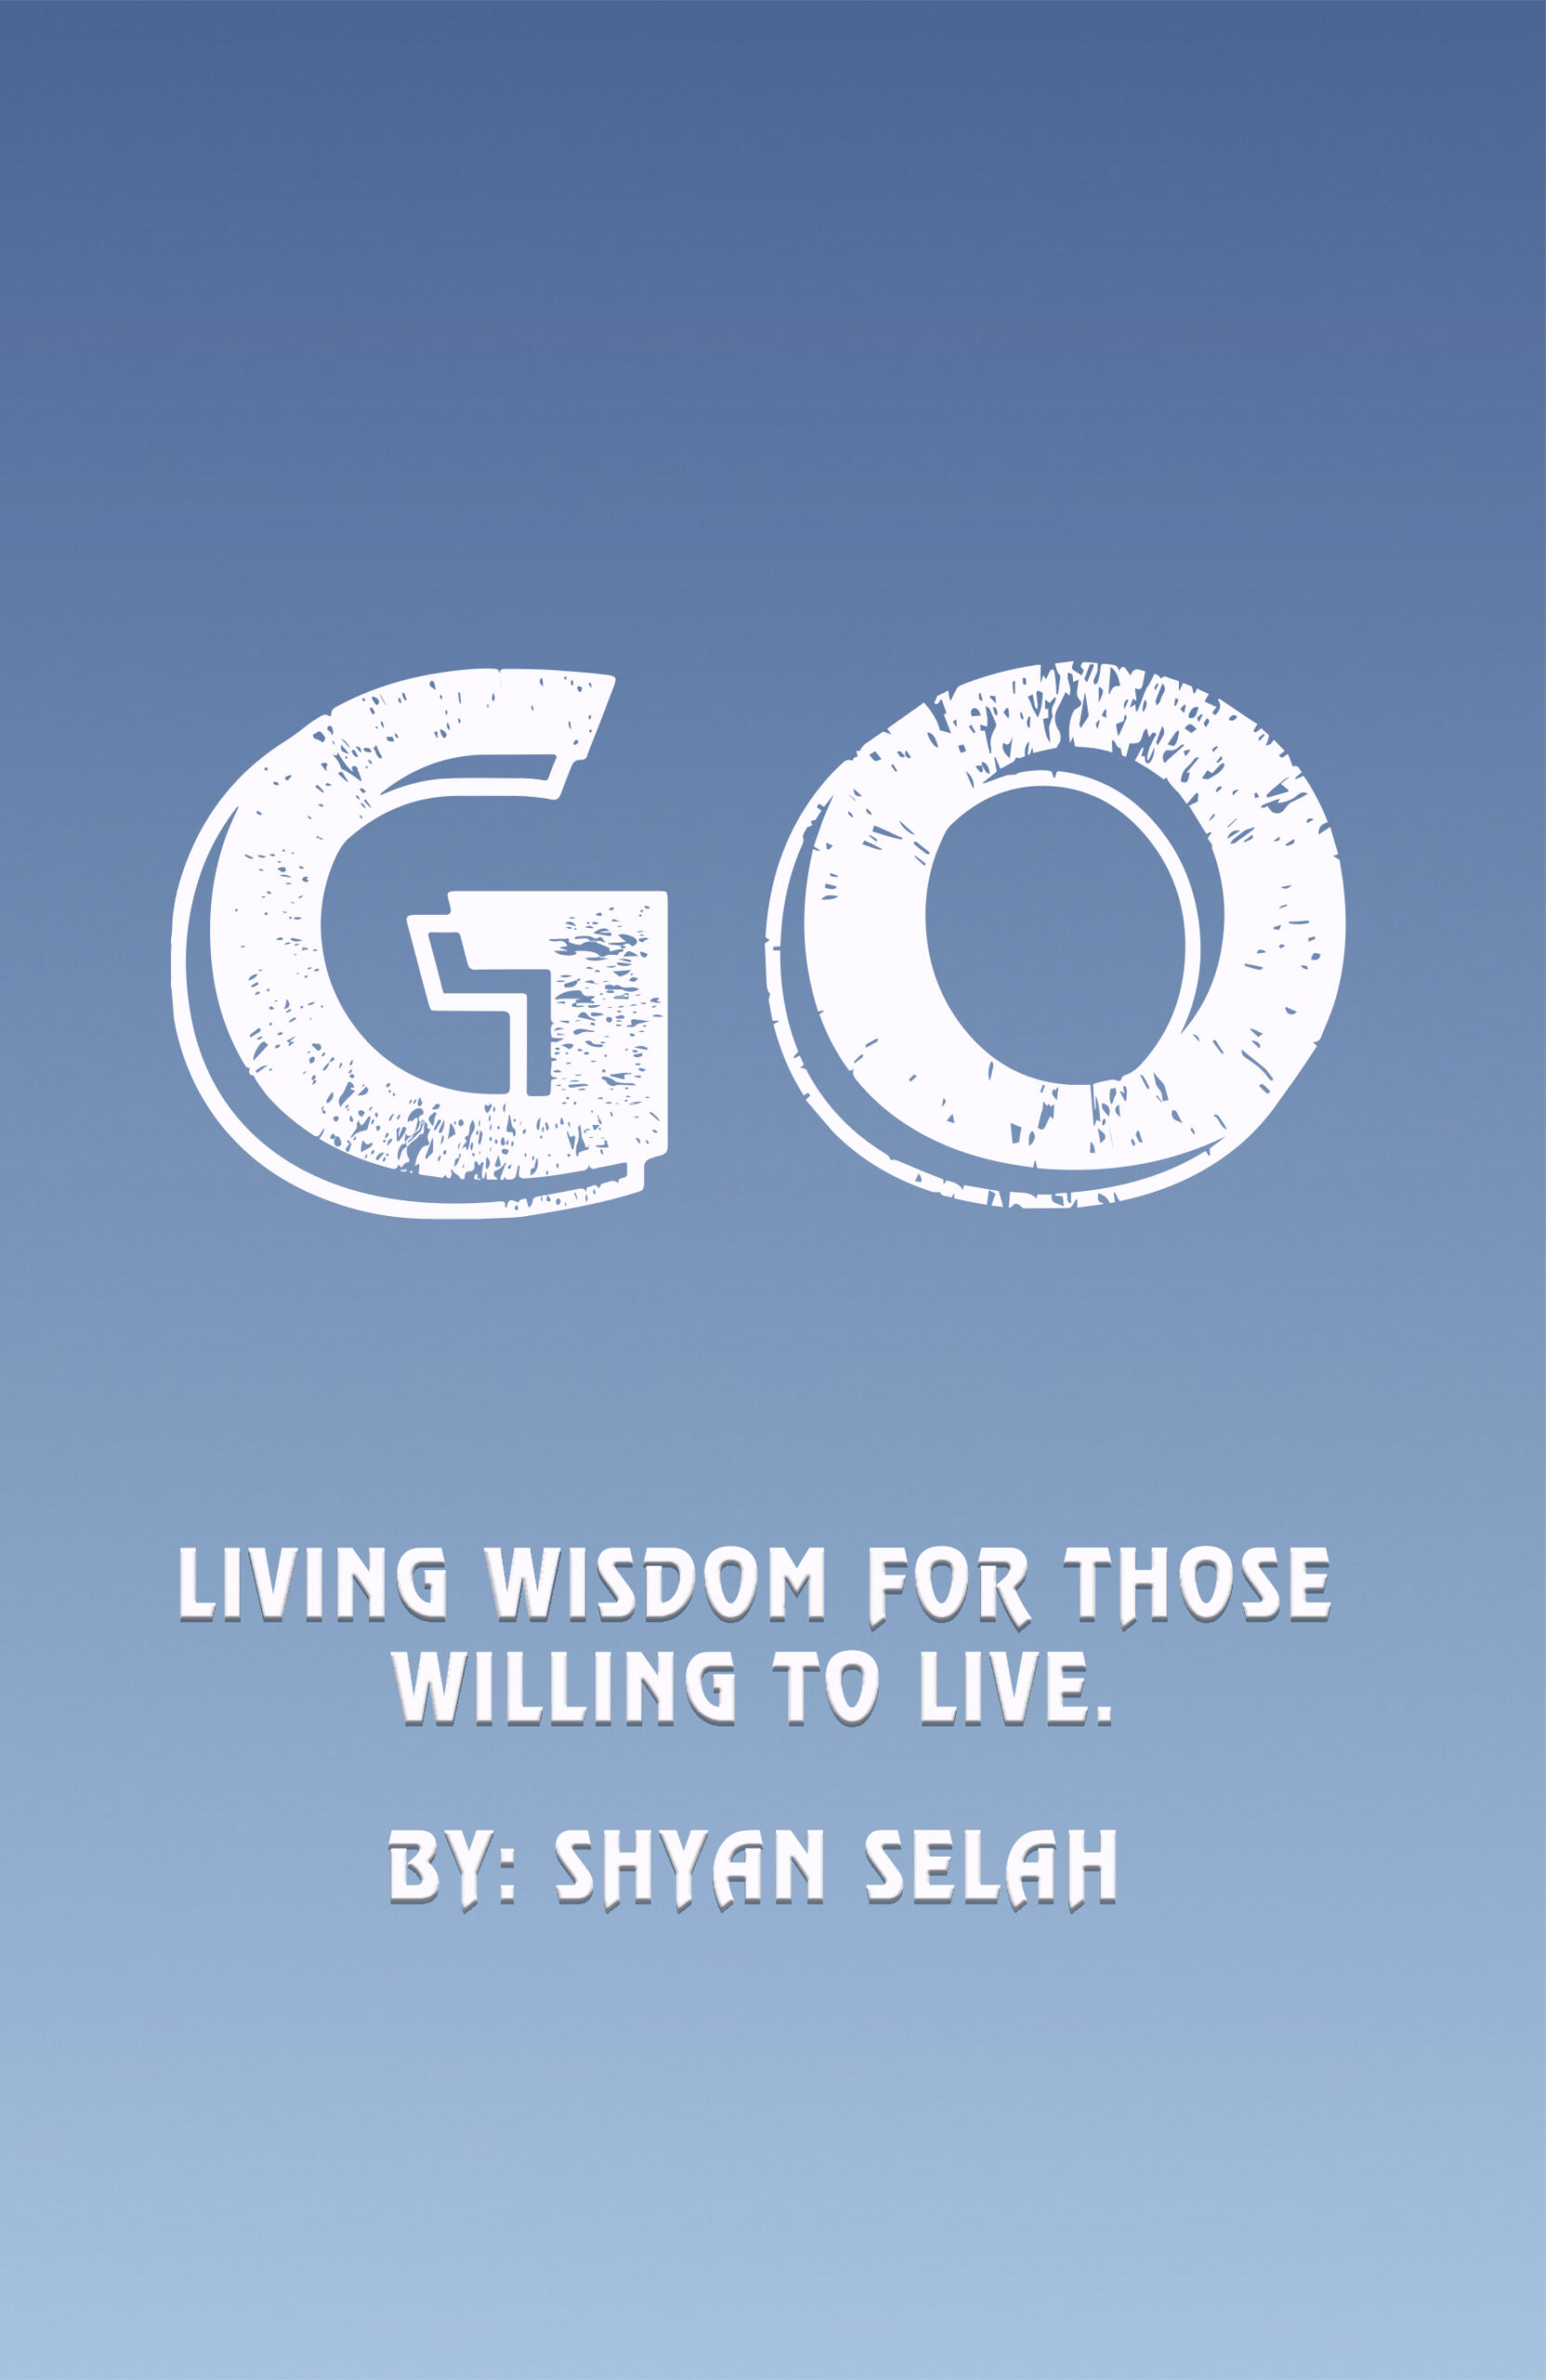 Go: Living Wisdom for Those Willing to Live by Shyan Selah